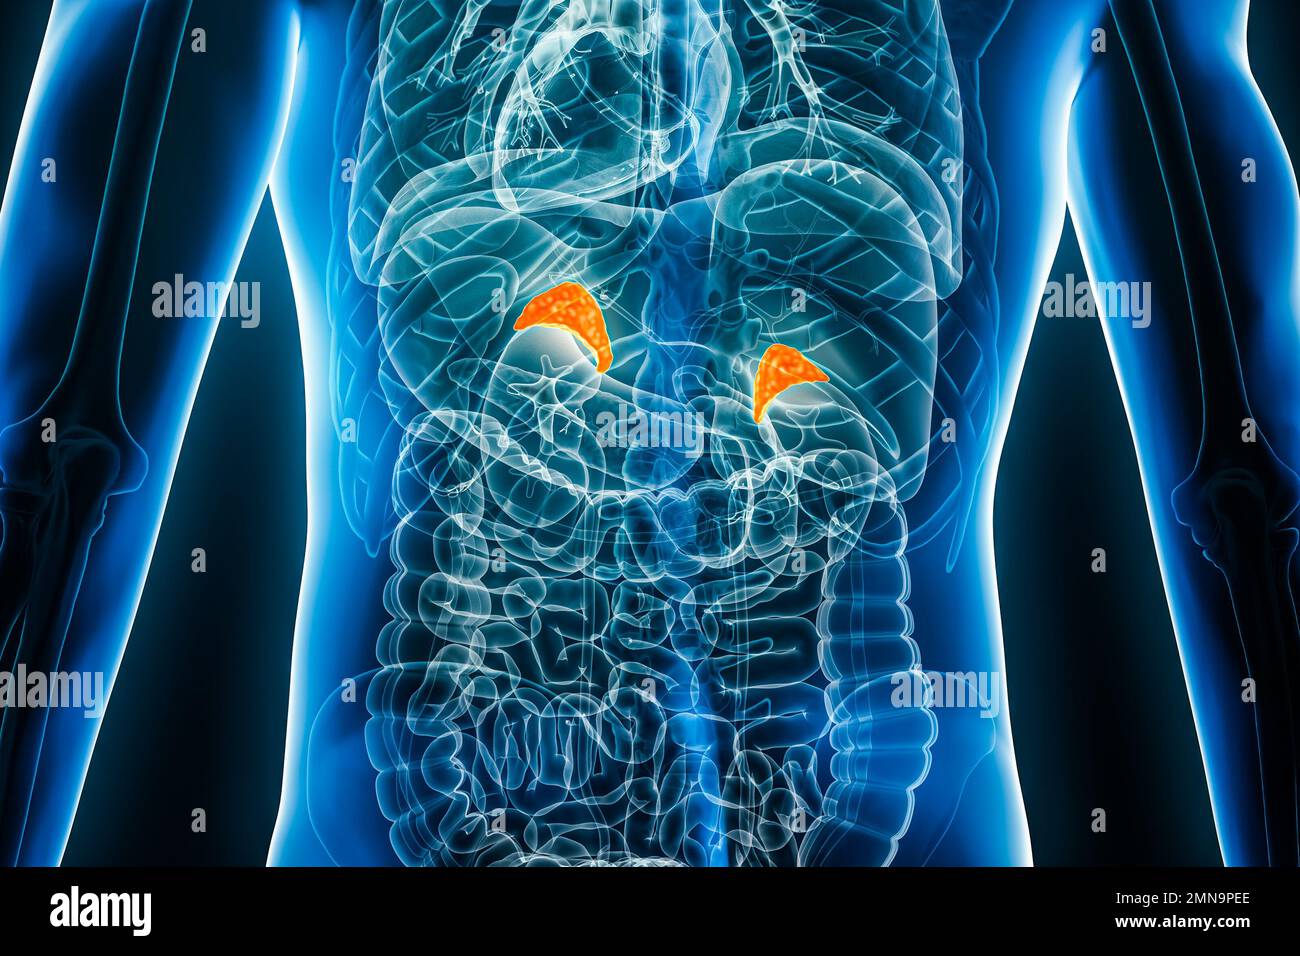 Xray adrenal or suprarenal glands 3D rendering illustration back view with male body contours. Human anatomy, endocrine system, medical, biology, scie Stock Photo